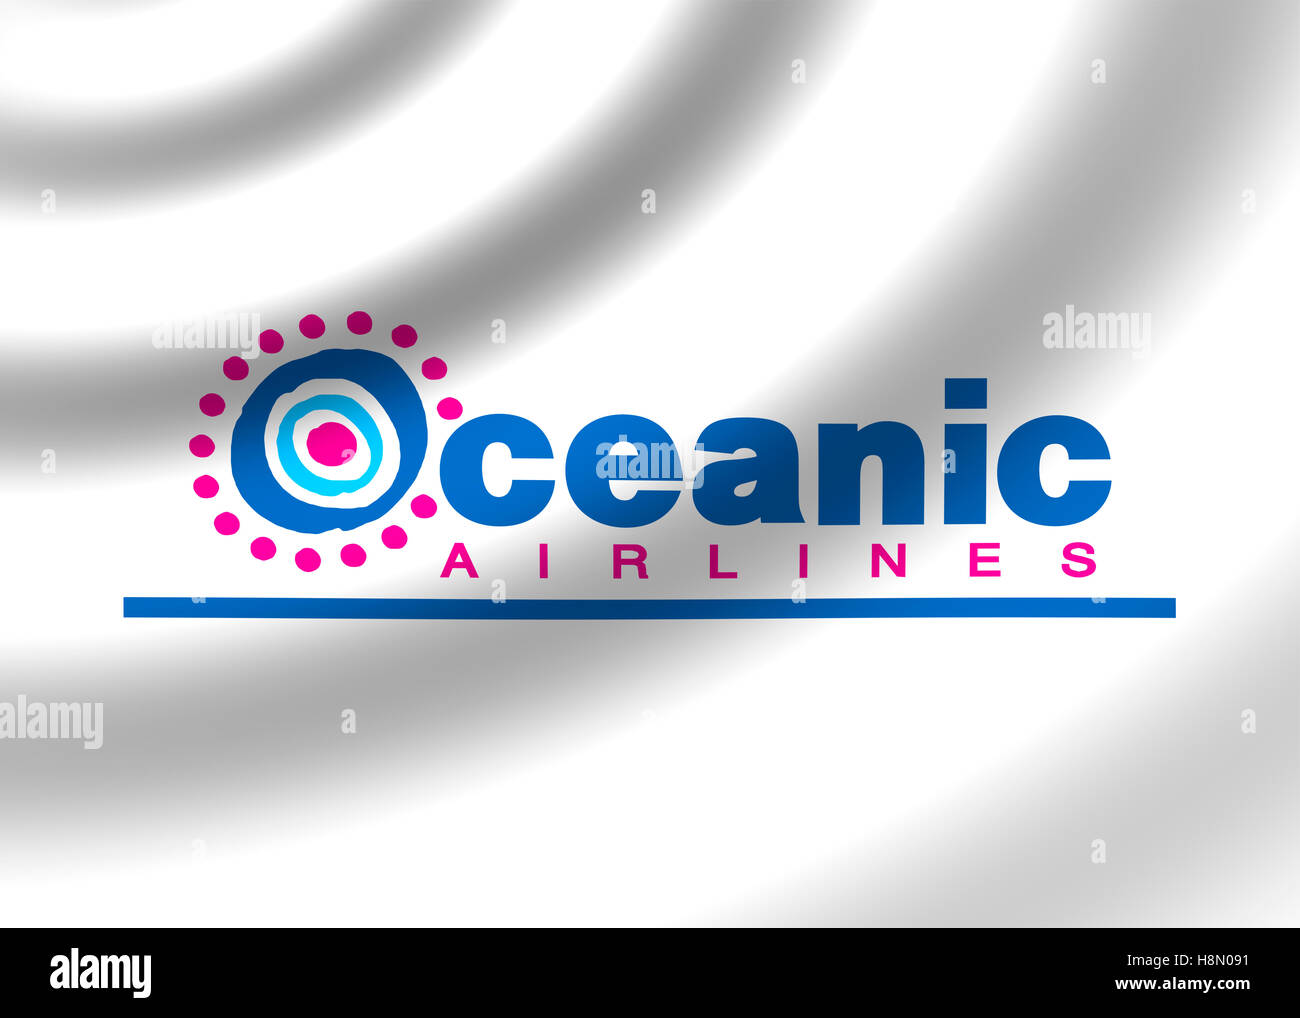 Oceanic Air Airlines logo Stock Photo